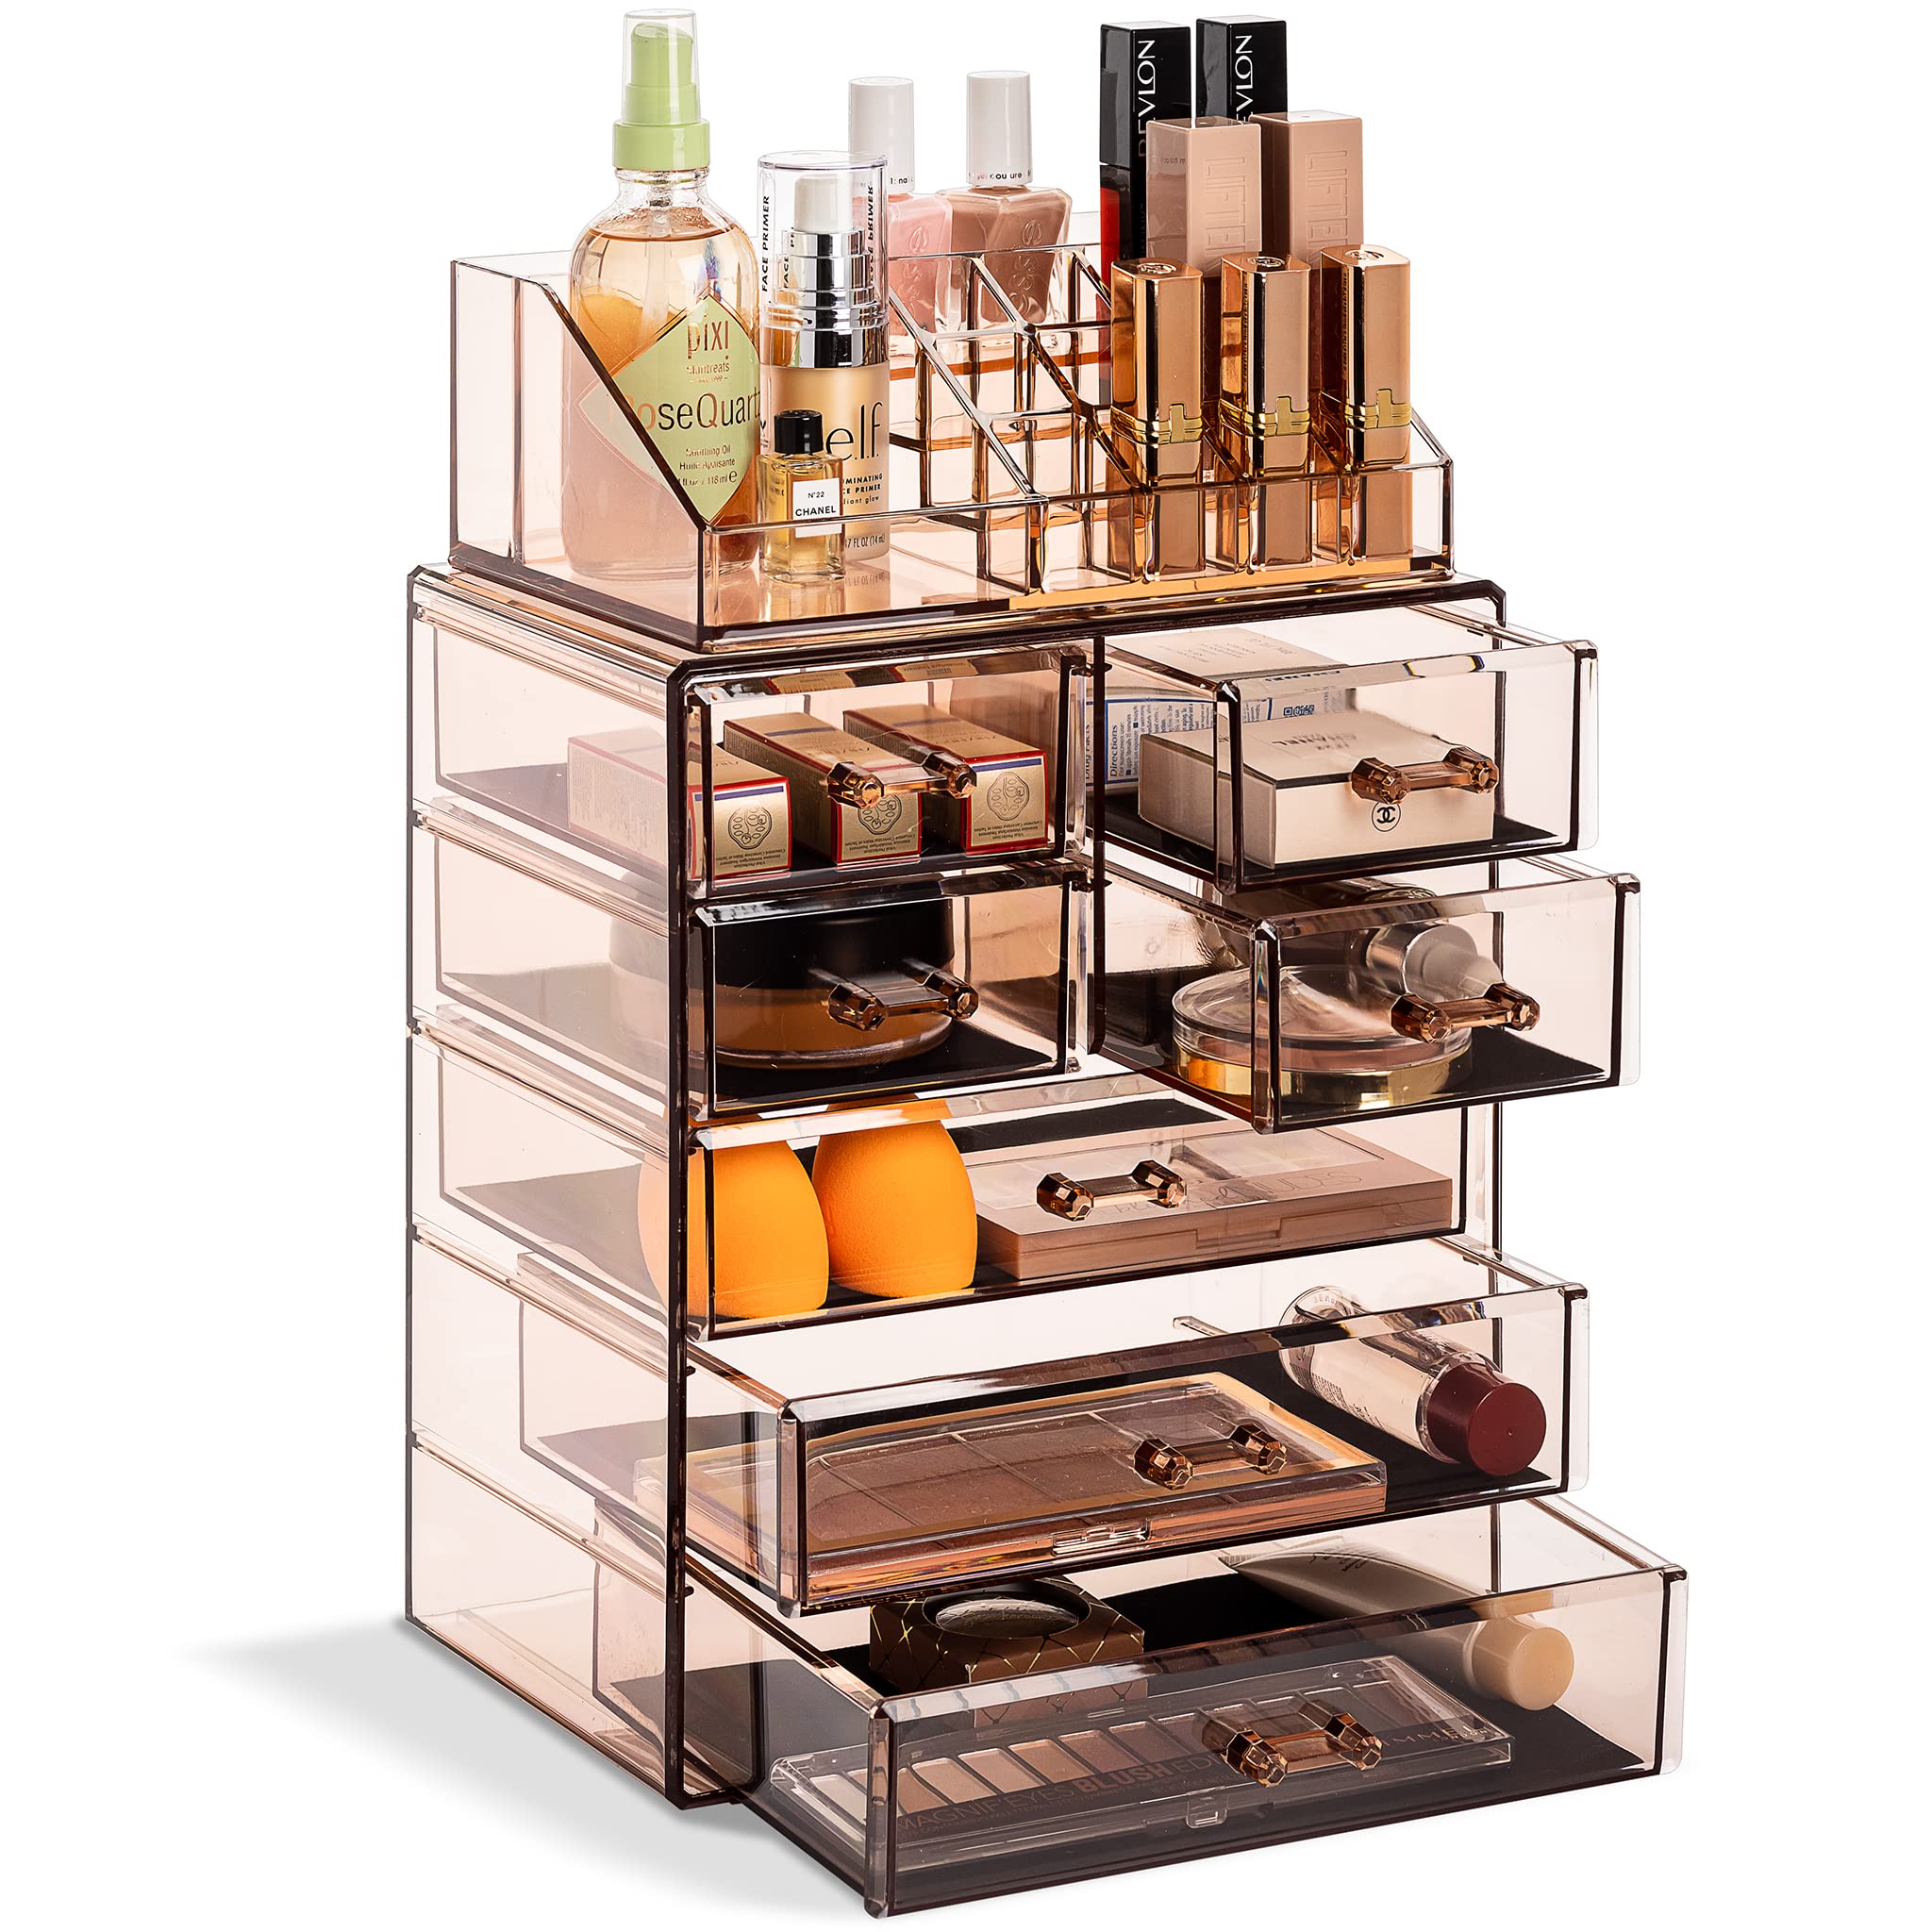 Sorbus Clear Cosmetic Makeup Organizer - Make Up & Jewelry Storage, Case & Display - Spacious Design - Great Holder for Dresser, Bathroom, Vanity & Countertop (3 Large, 4 Small Drawers) [Bronze Glow]